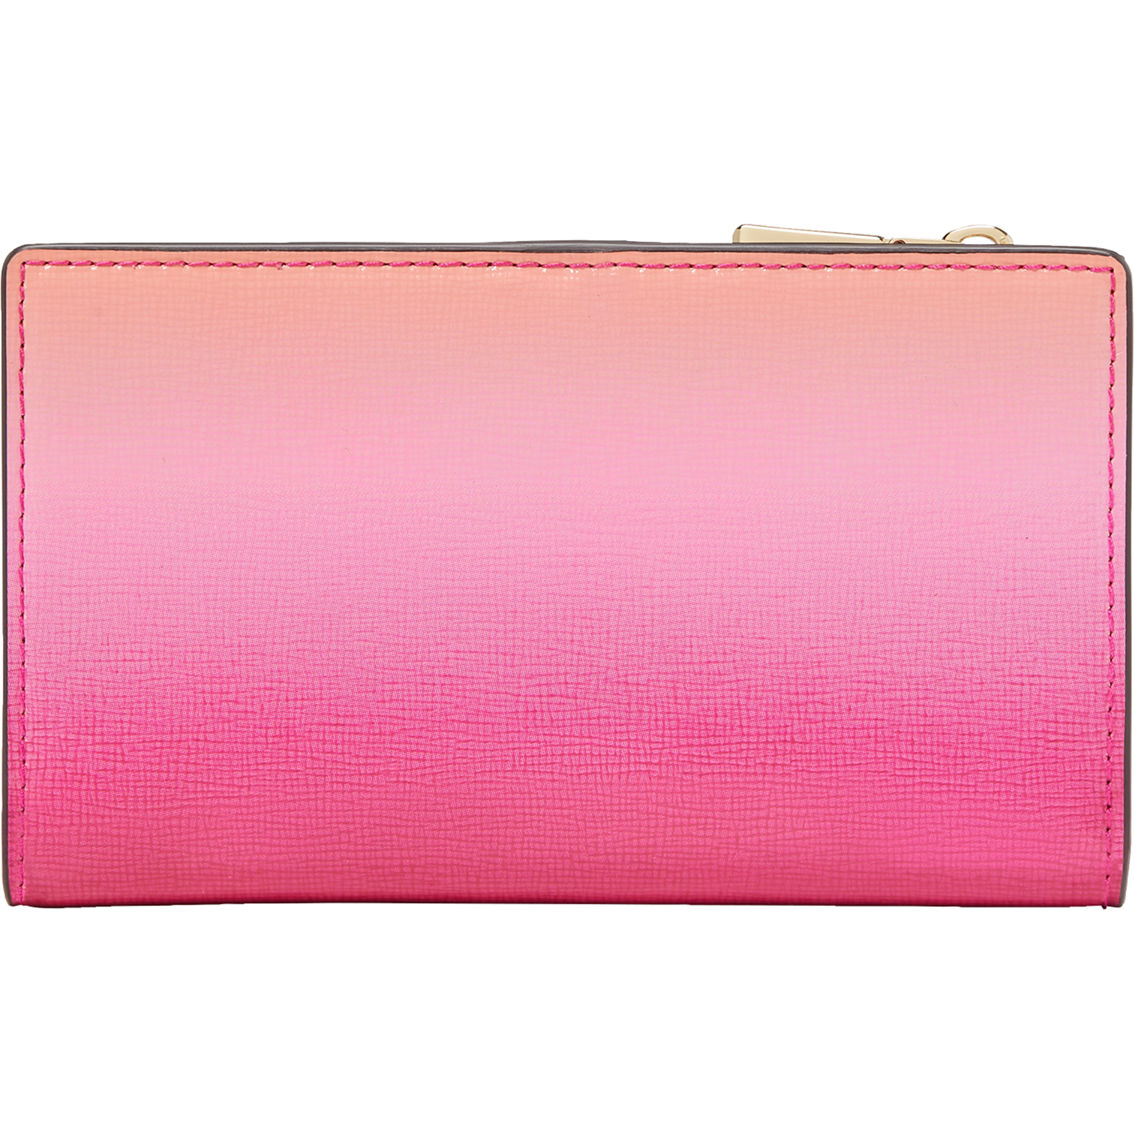 Kate Spade Morgan Ombre Saffiano Leather Small Slim Bifold Wallet - Image 2 of 4